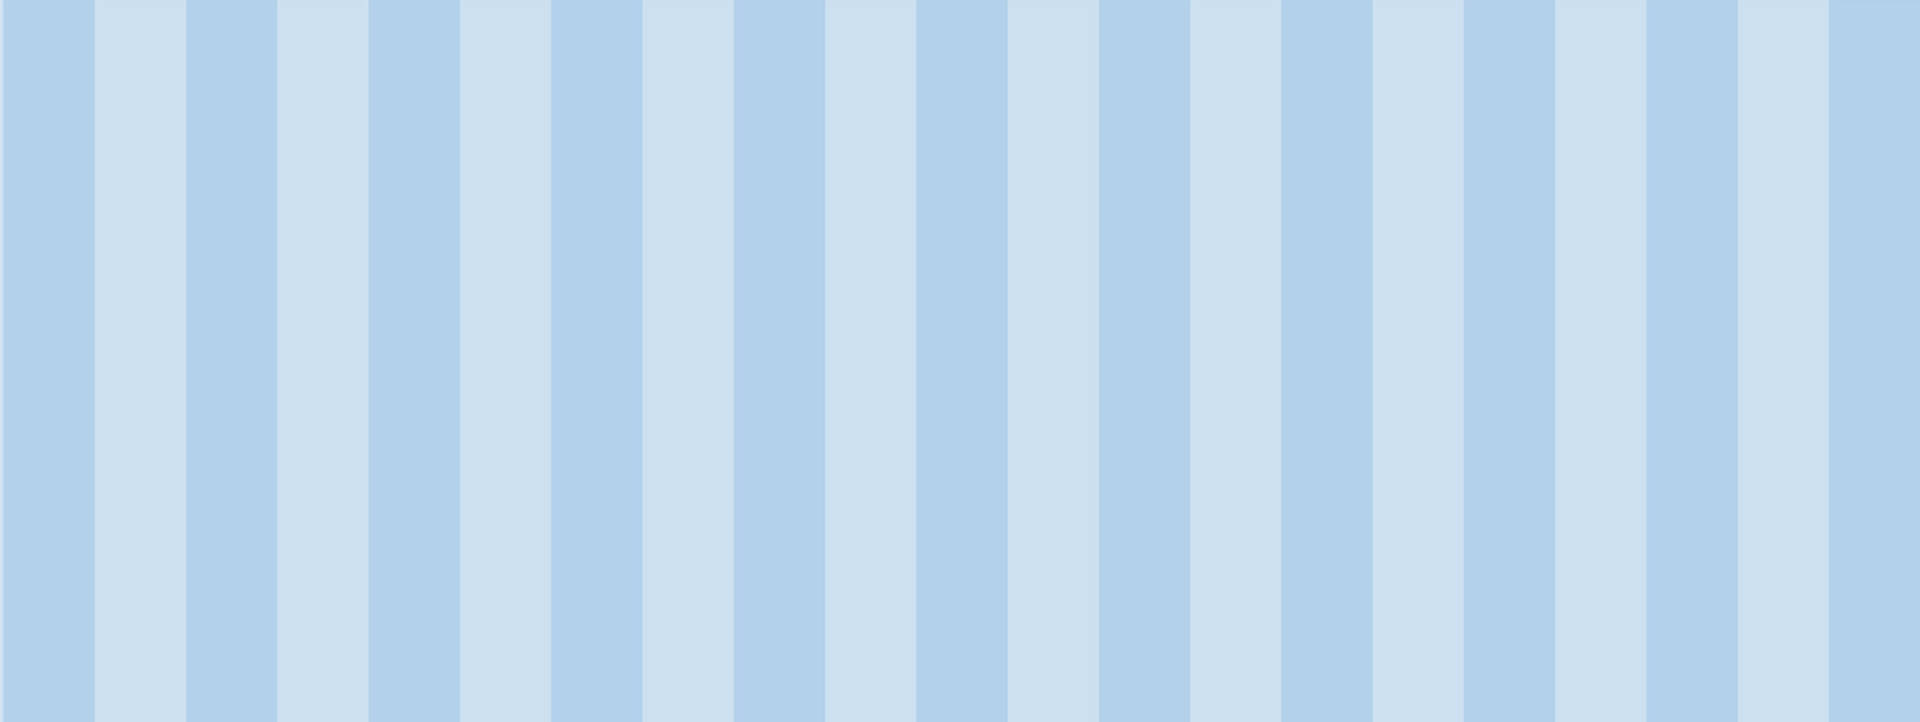 3901X1467 Light Blue Wallpaper and Background